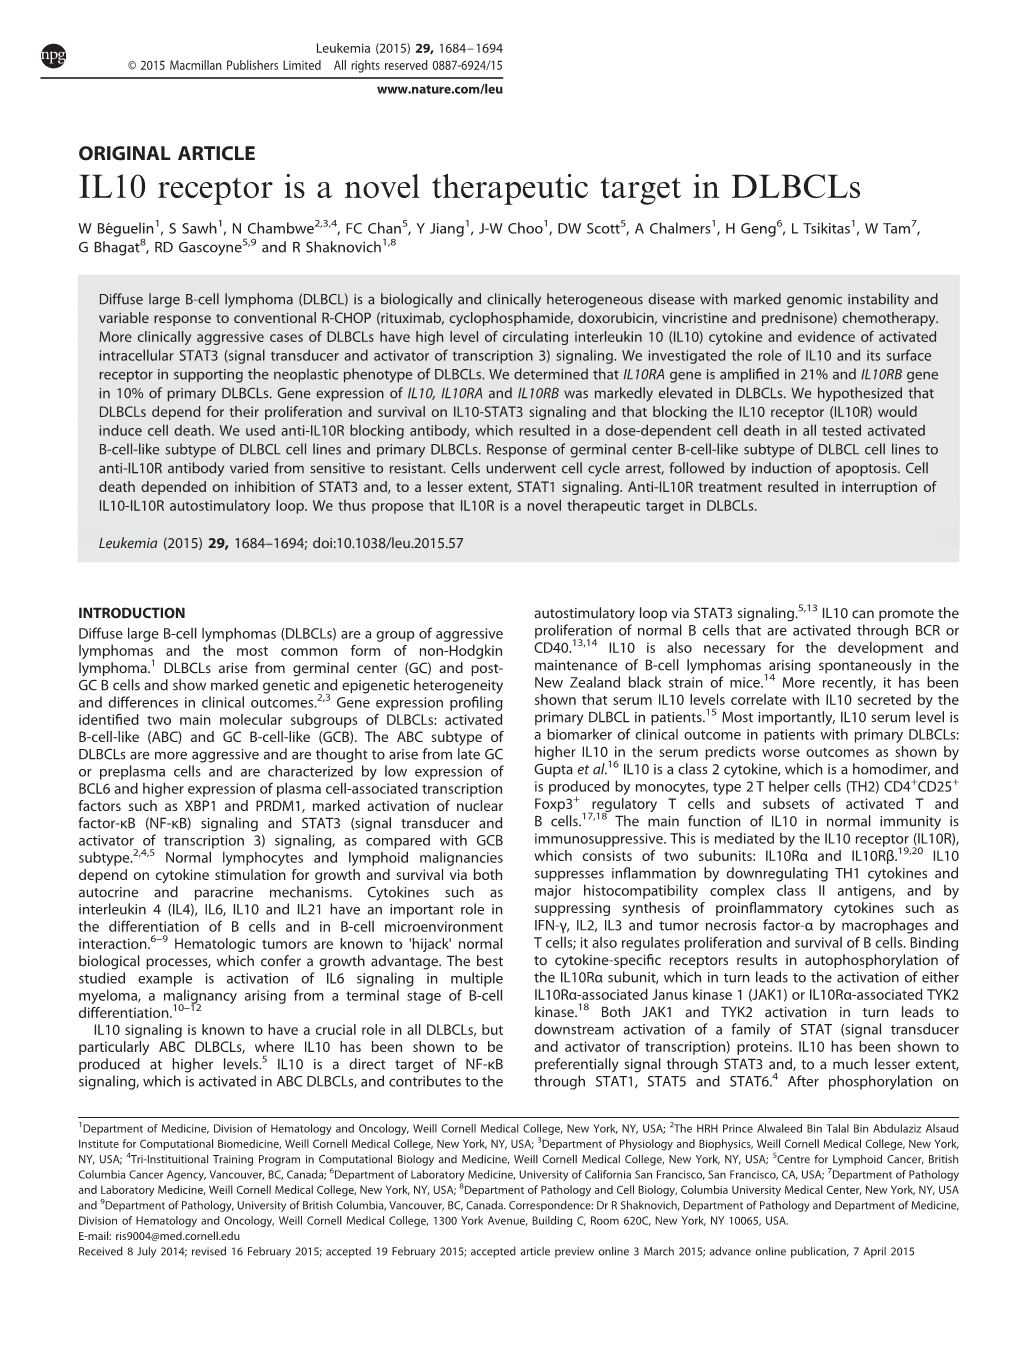 IL10 Receptor Is a Novel Therapeutic Target in Dlbcls